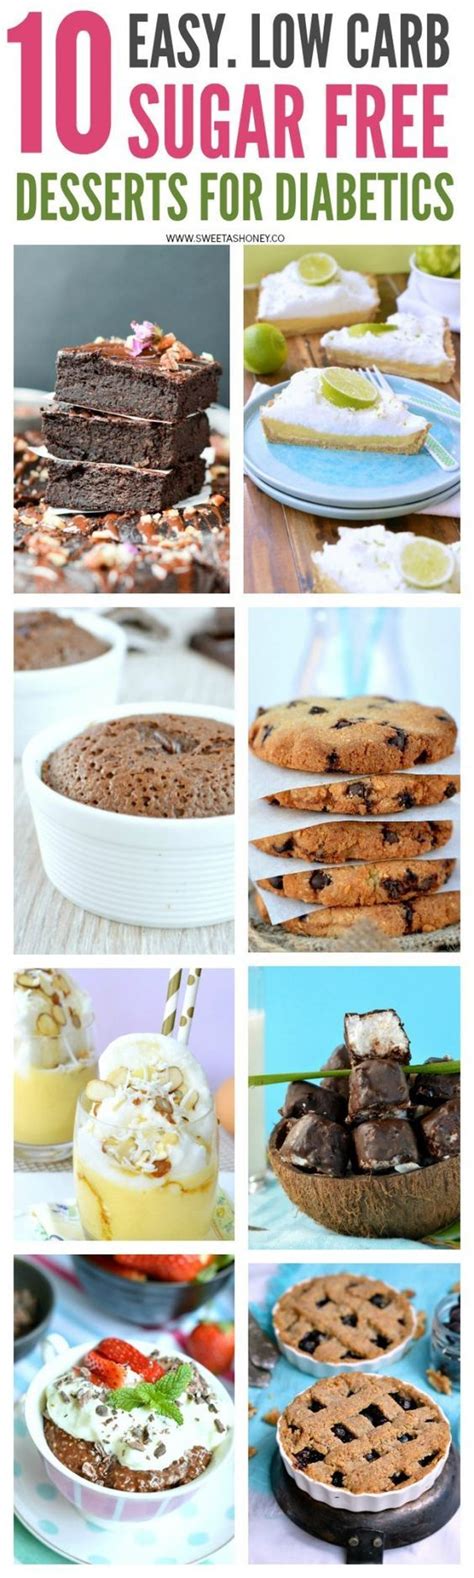 25 recipes of easy & quick tasty desserts to lose fat & weight, sugar free, keto friendly. Yes you can have diabetes and eat desserts ! Indulge with those guilt free sugar free dessert ...